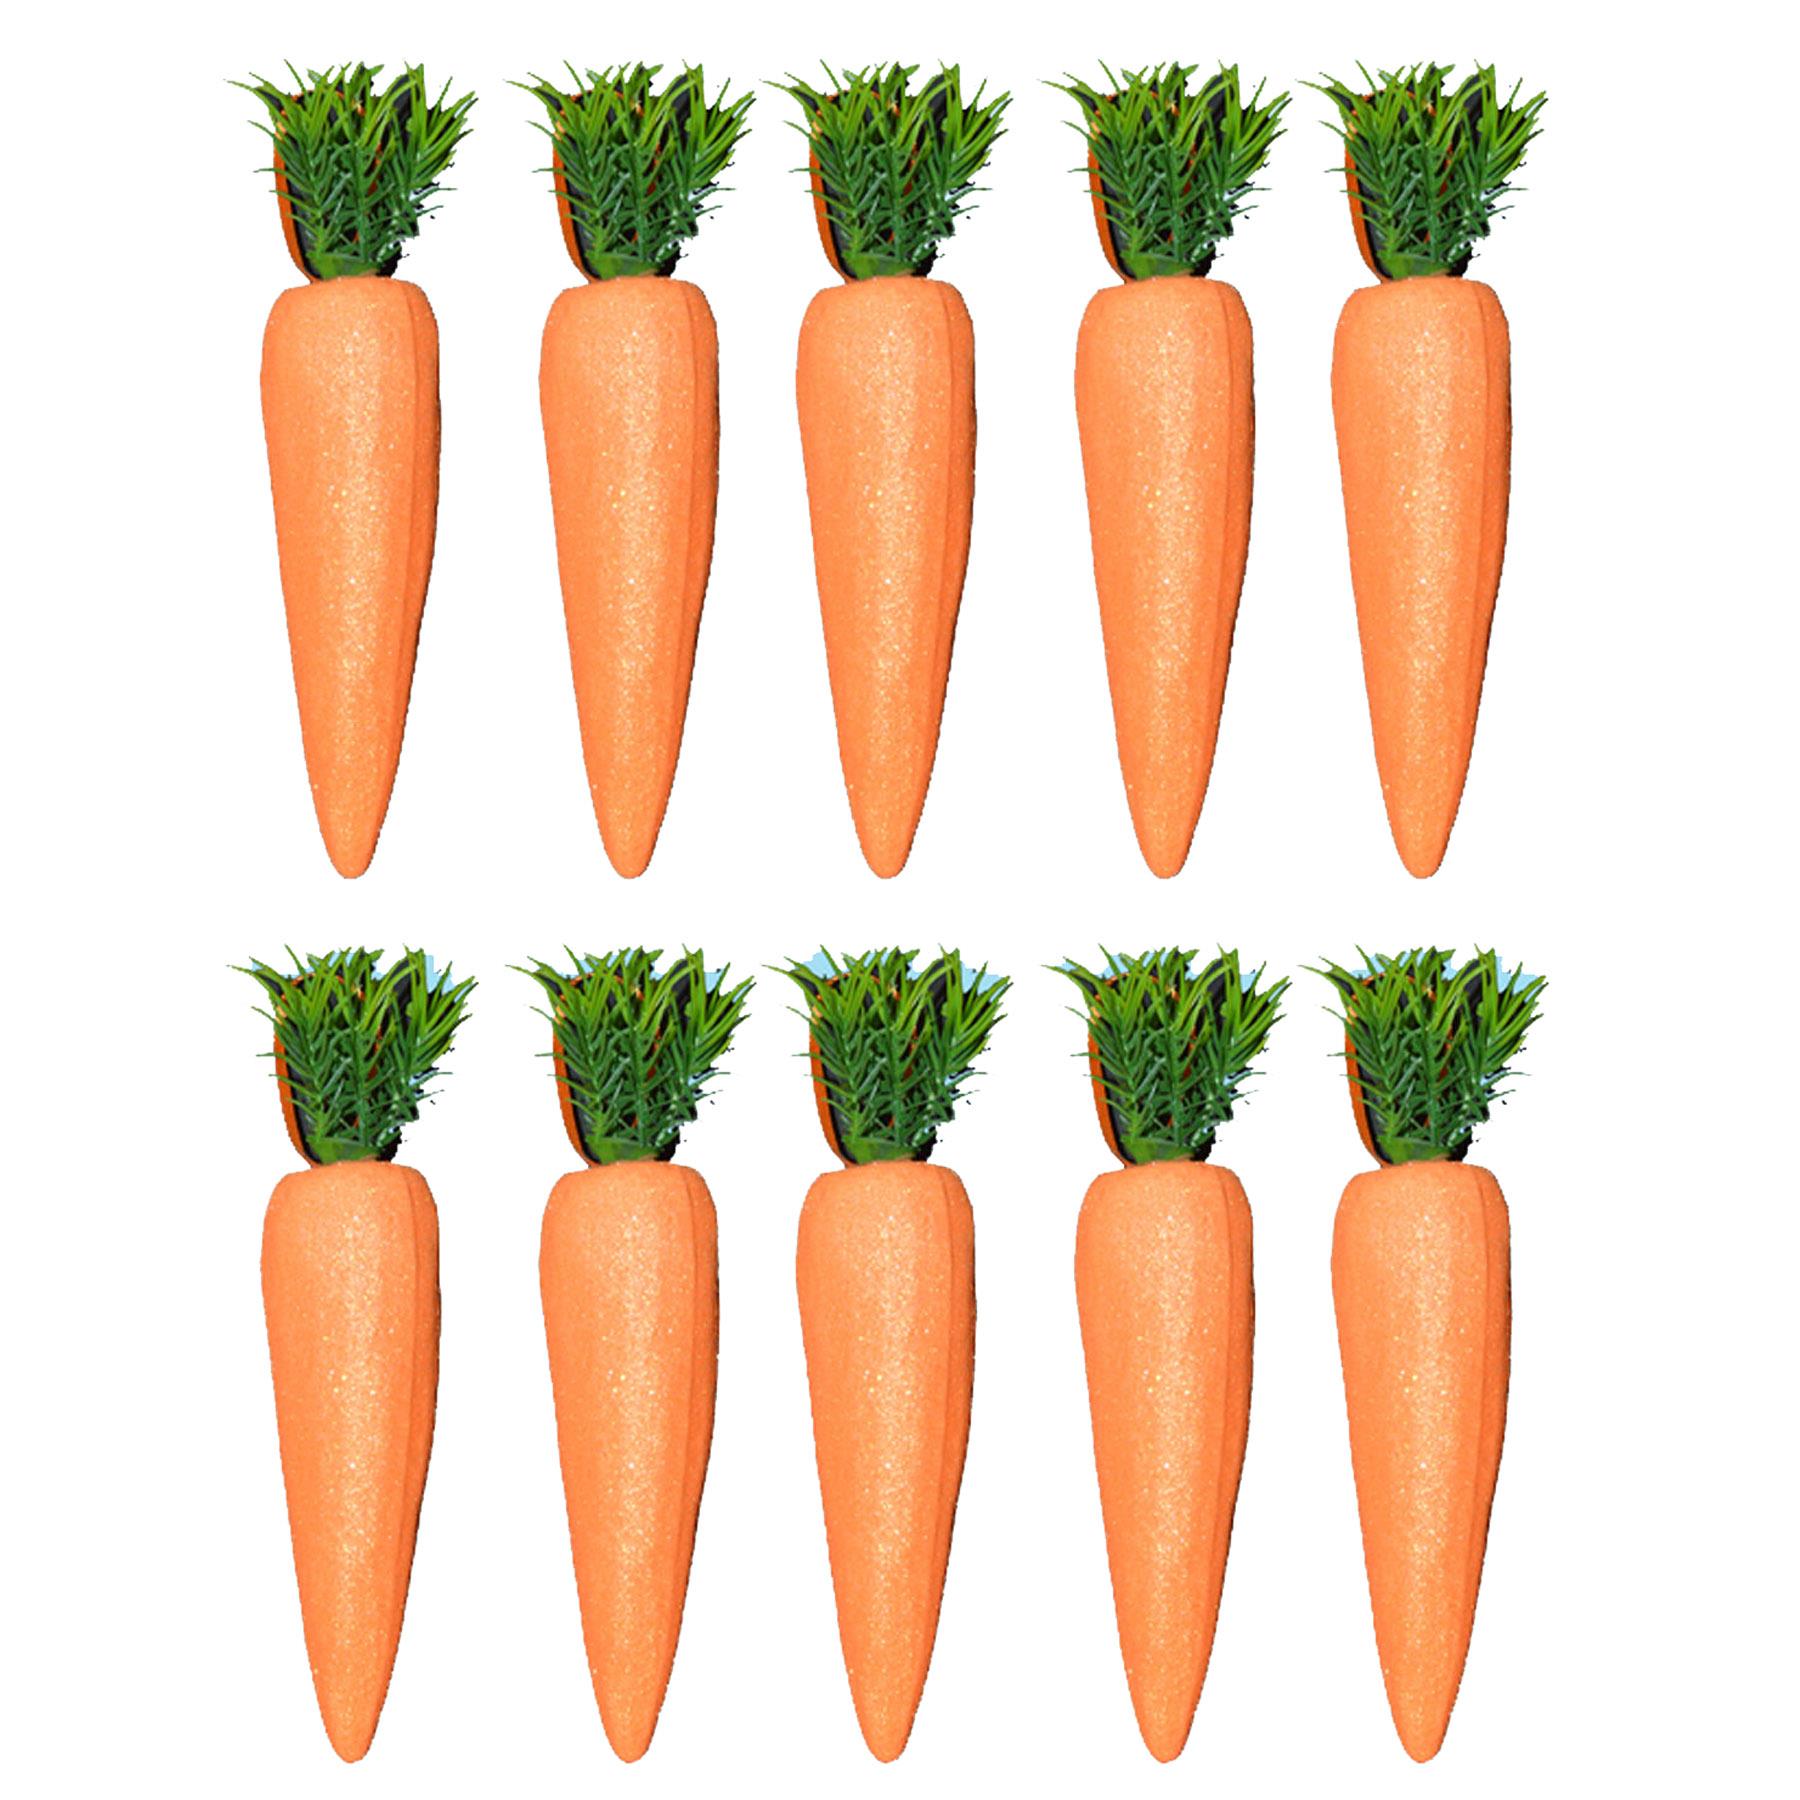 Easter Decorations, Bonnet Making, Arts and Crafts - 10 Pk Glitter Carrots